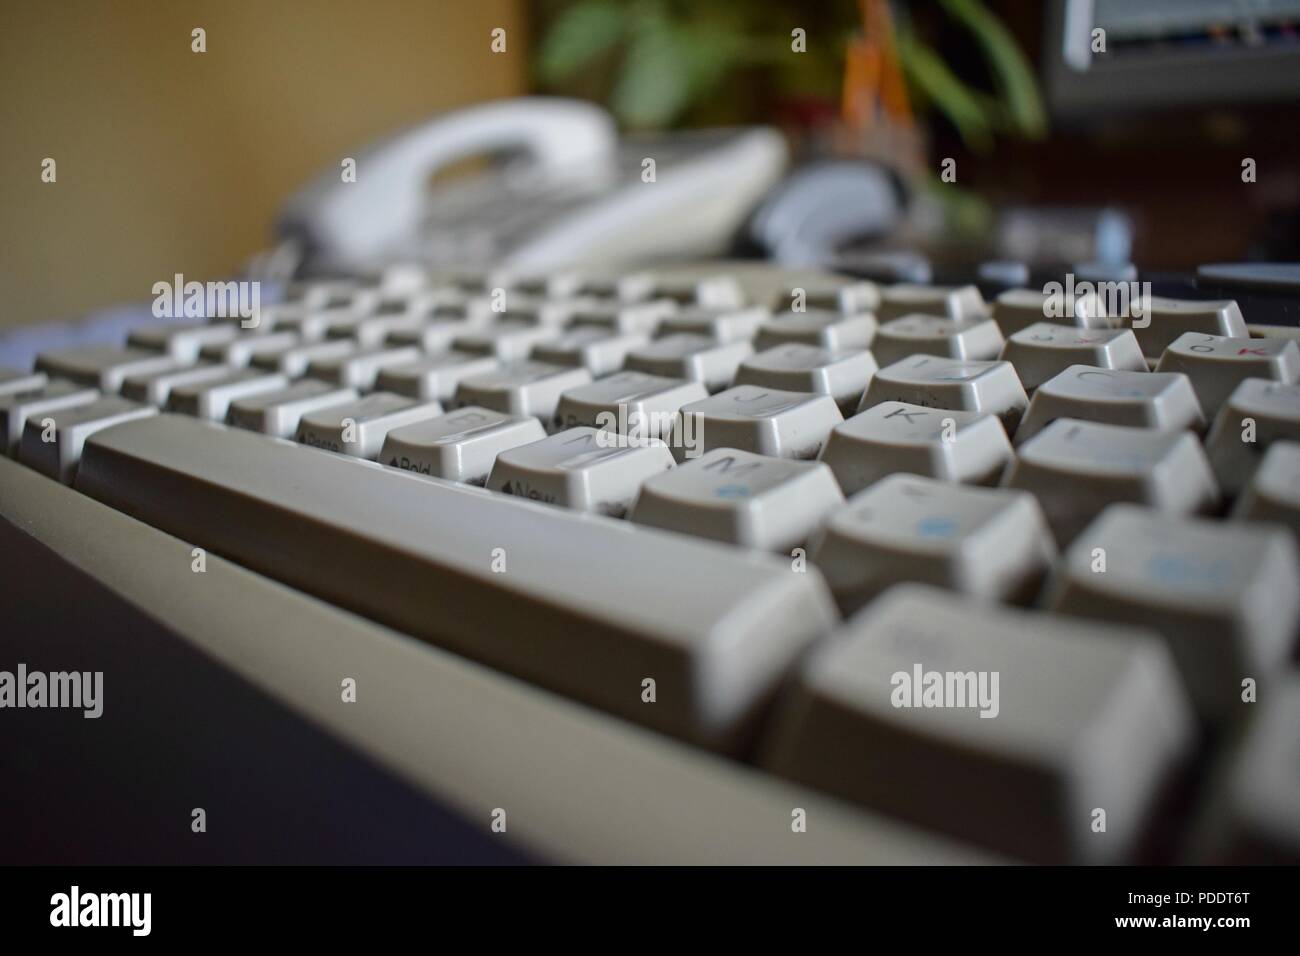 Closeup image of a keyboard and office space. Office time. Computer equipment. Workplace of an office employee. Stock Photo